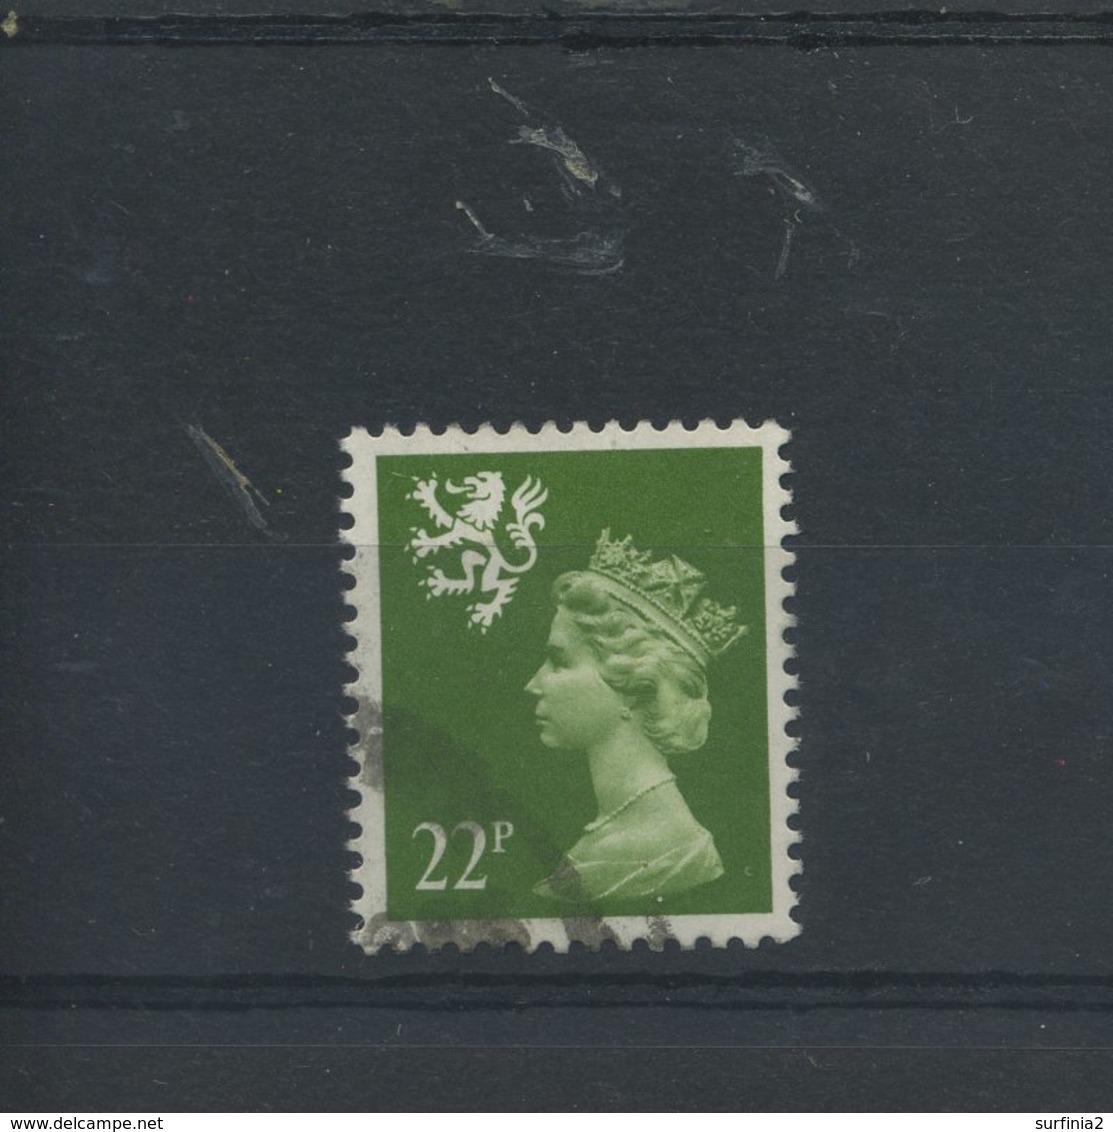 STAMPS - SCOTLAND - S48 22p TYPE II (EYE JOINED) FINE USED - Scotland